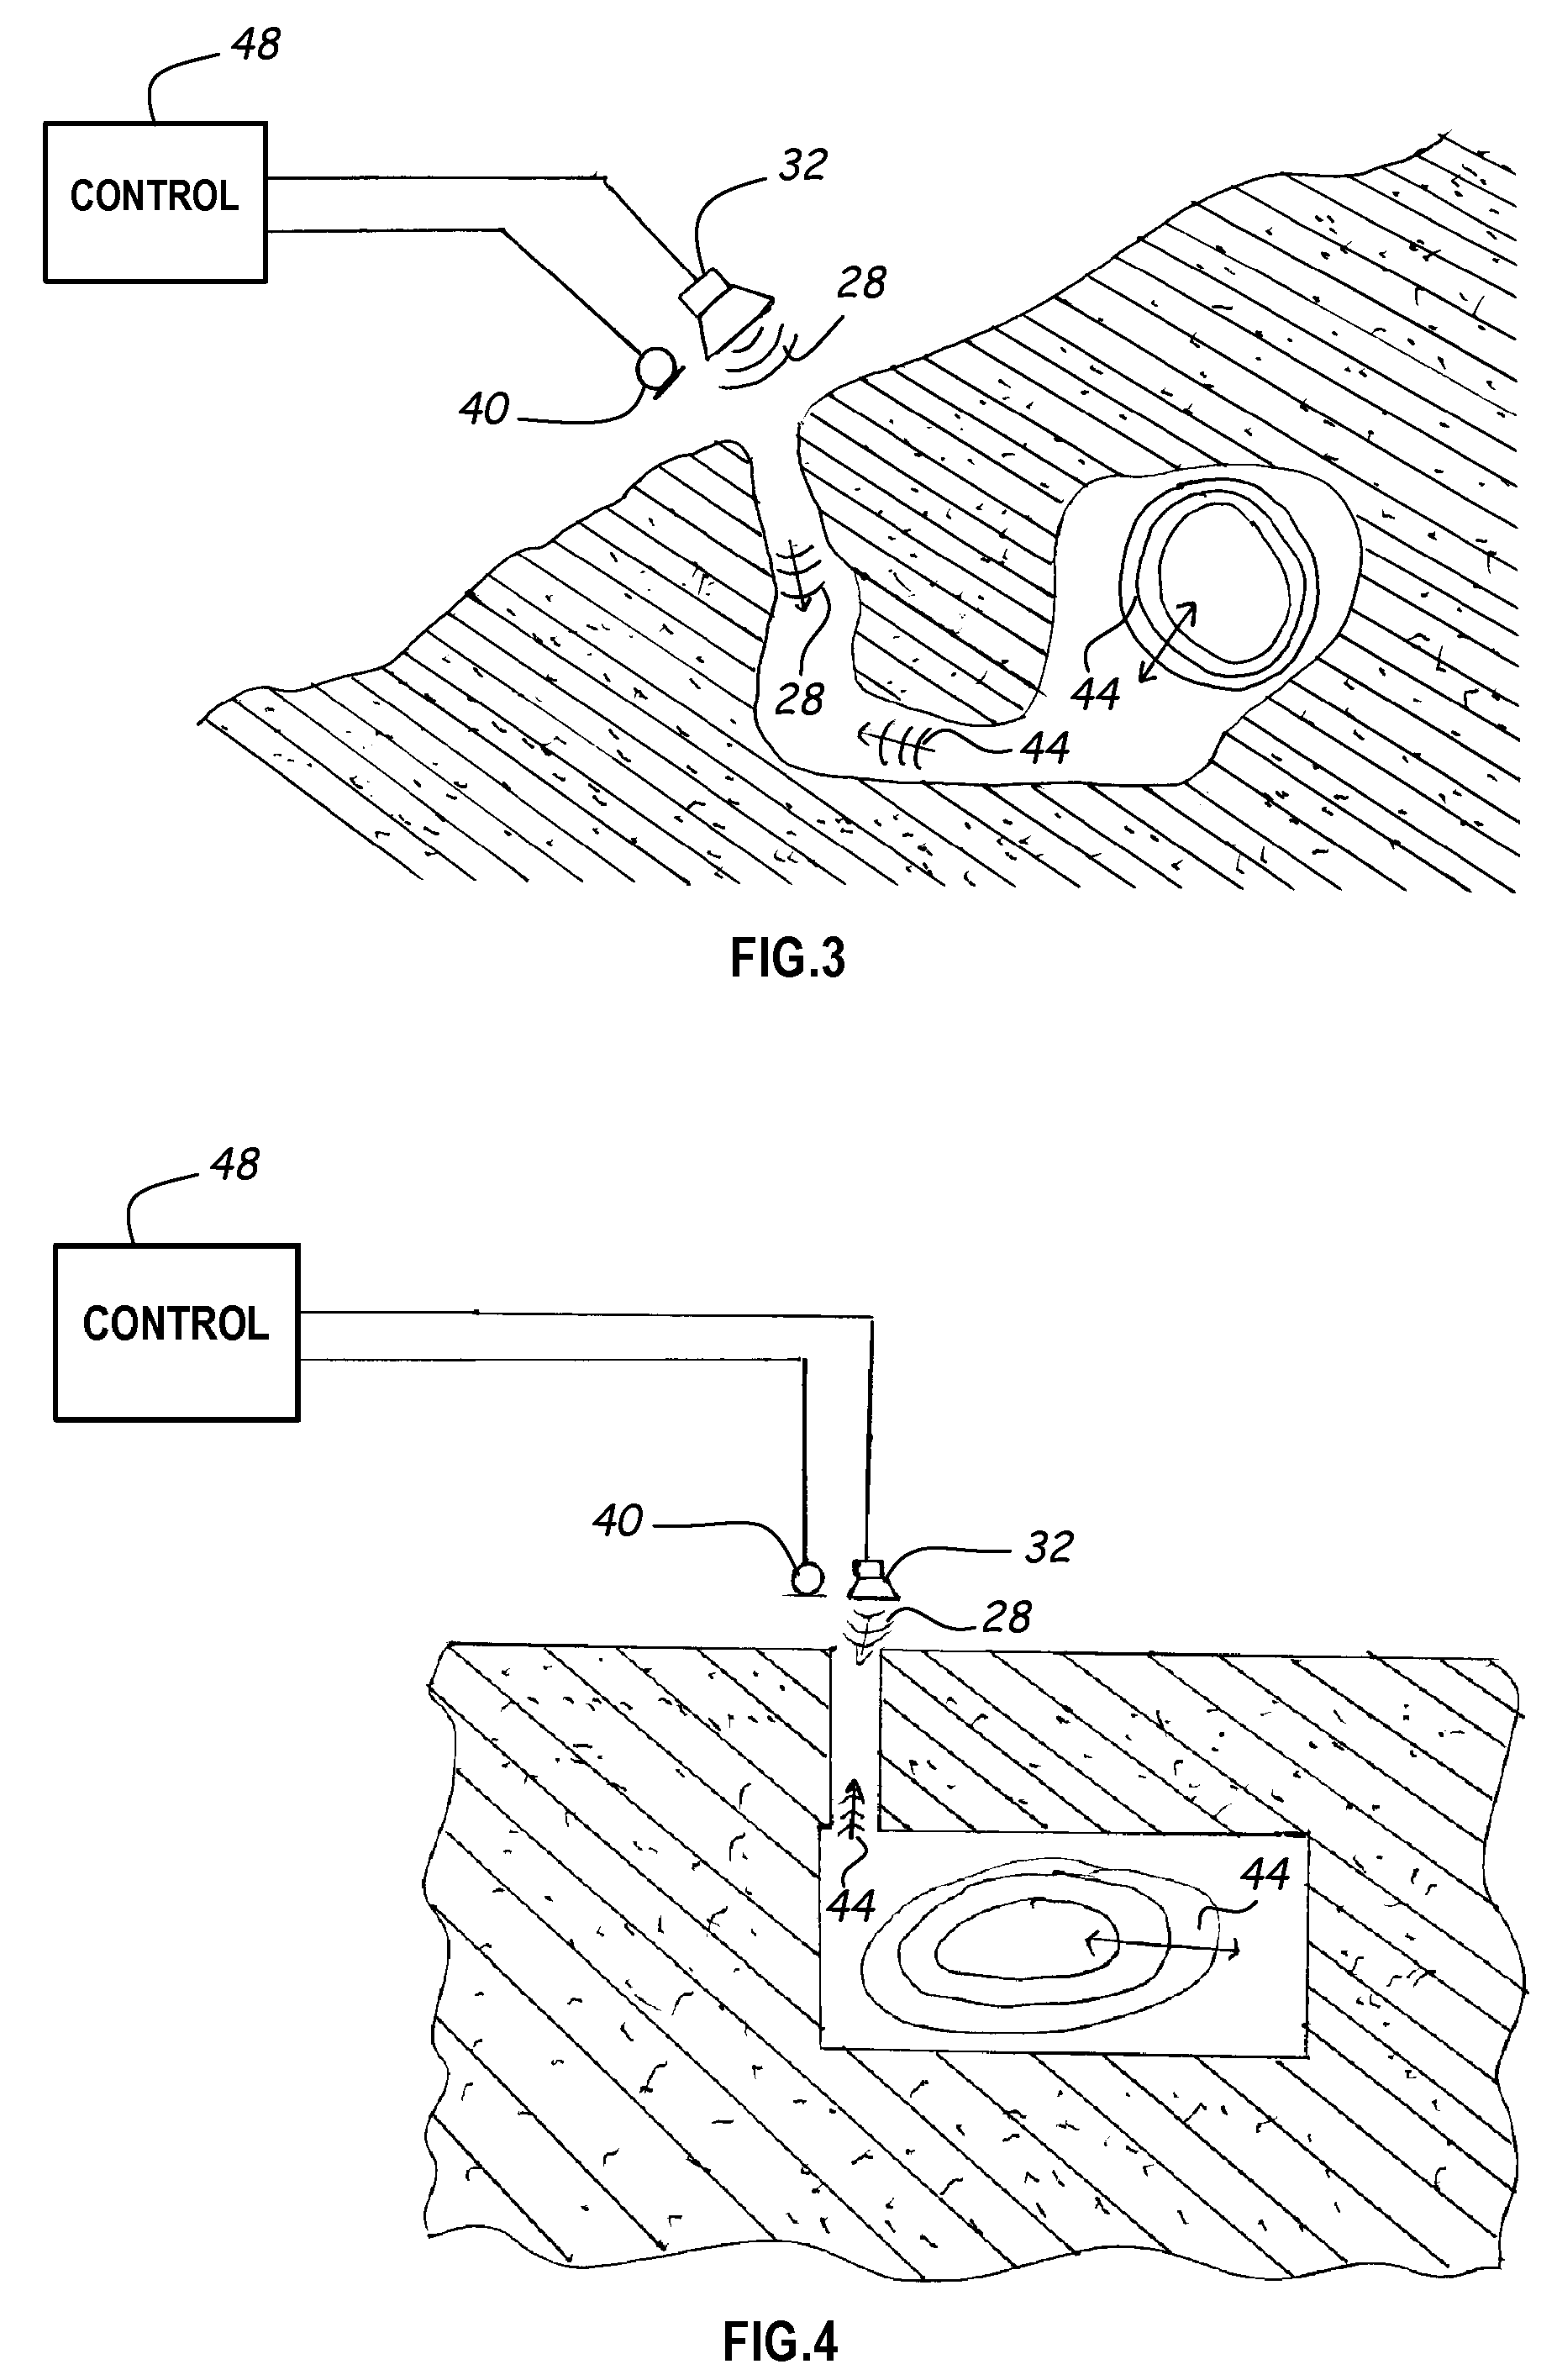 Method and Apparatus for Acoustic Sensing of Structures